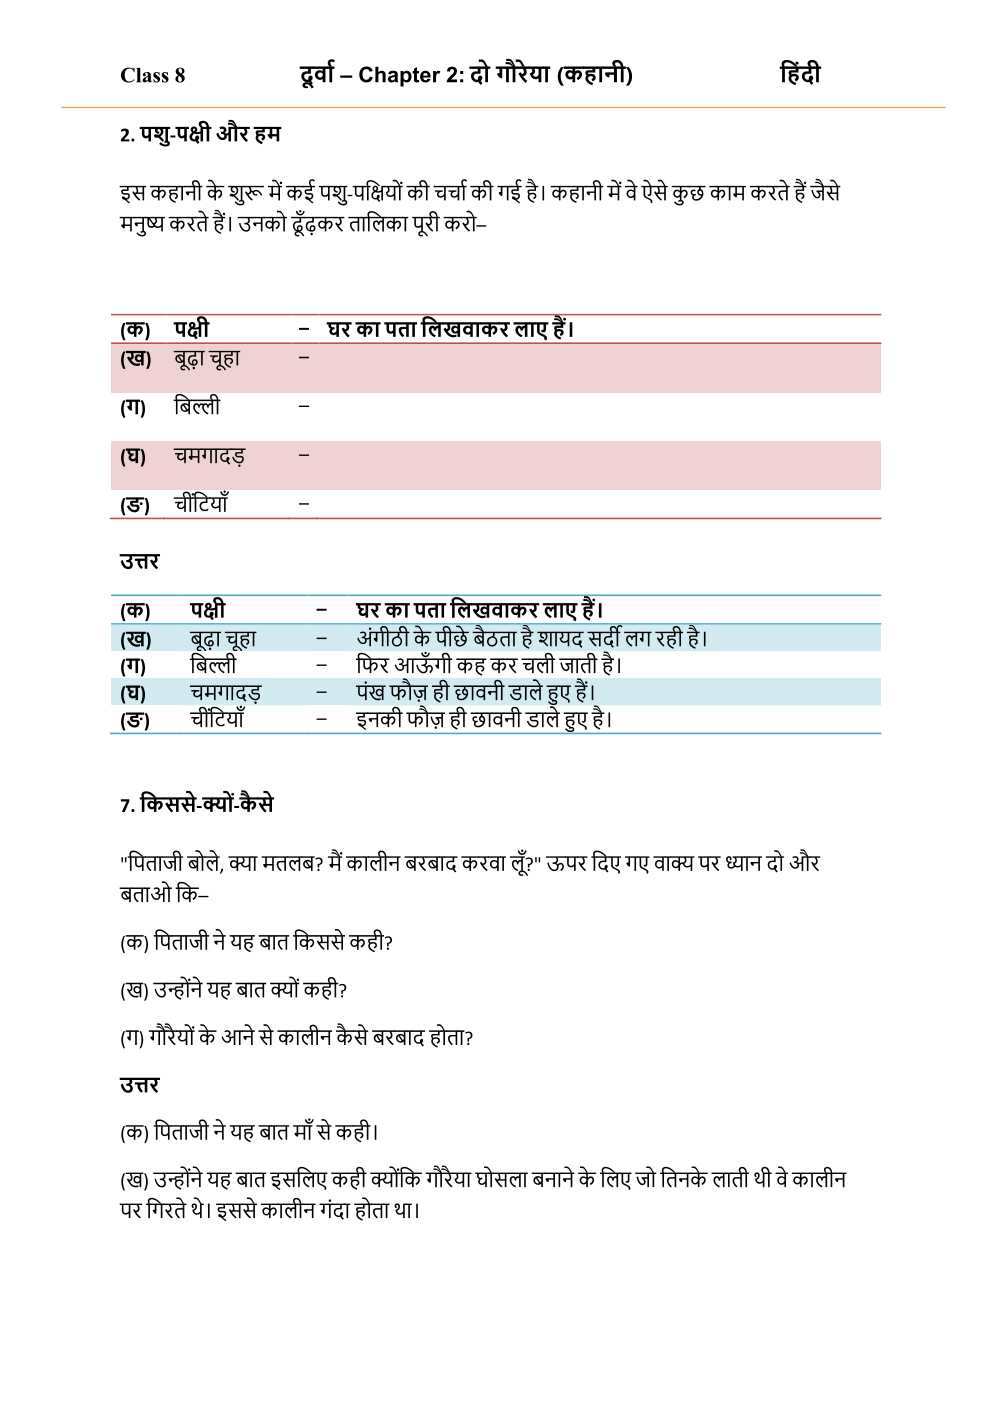 NCERT Solutions For Class 8 Hindi Durva Chapter 2